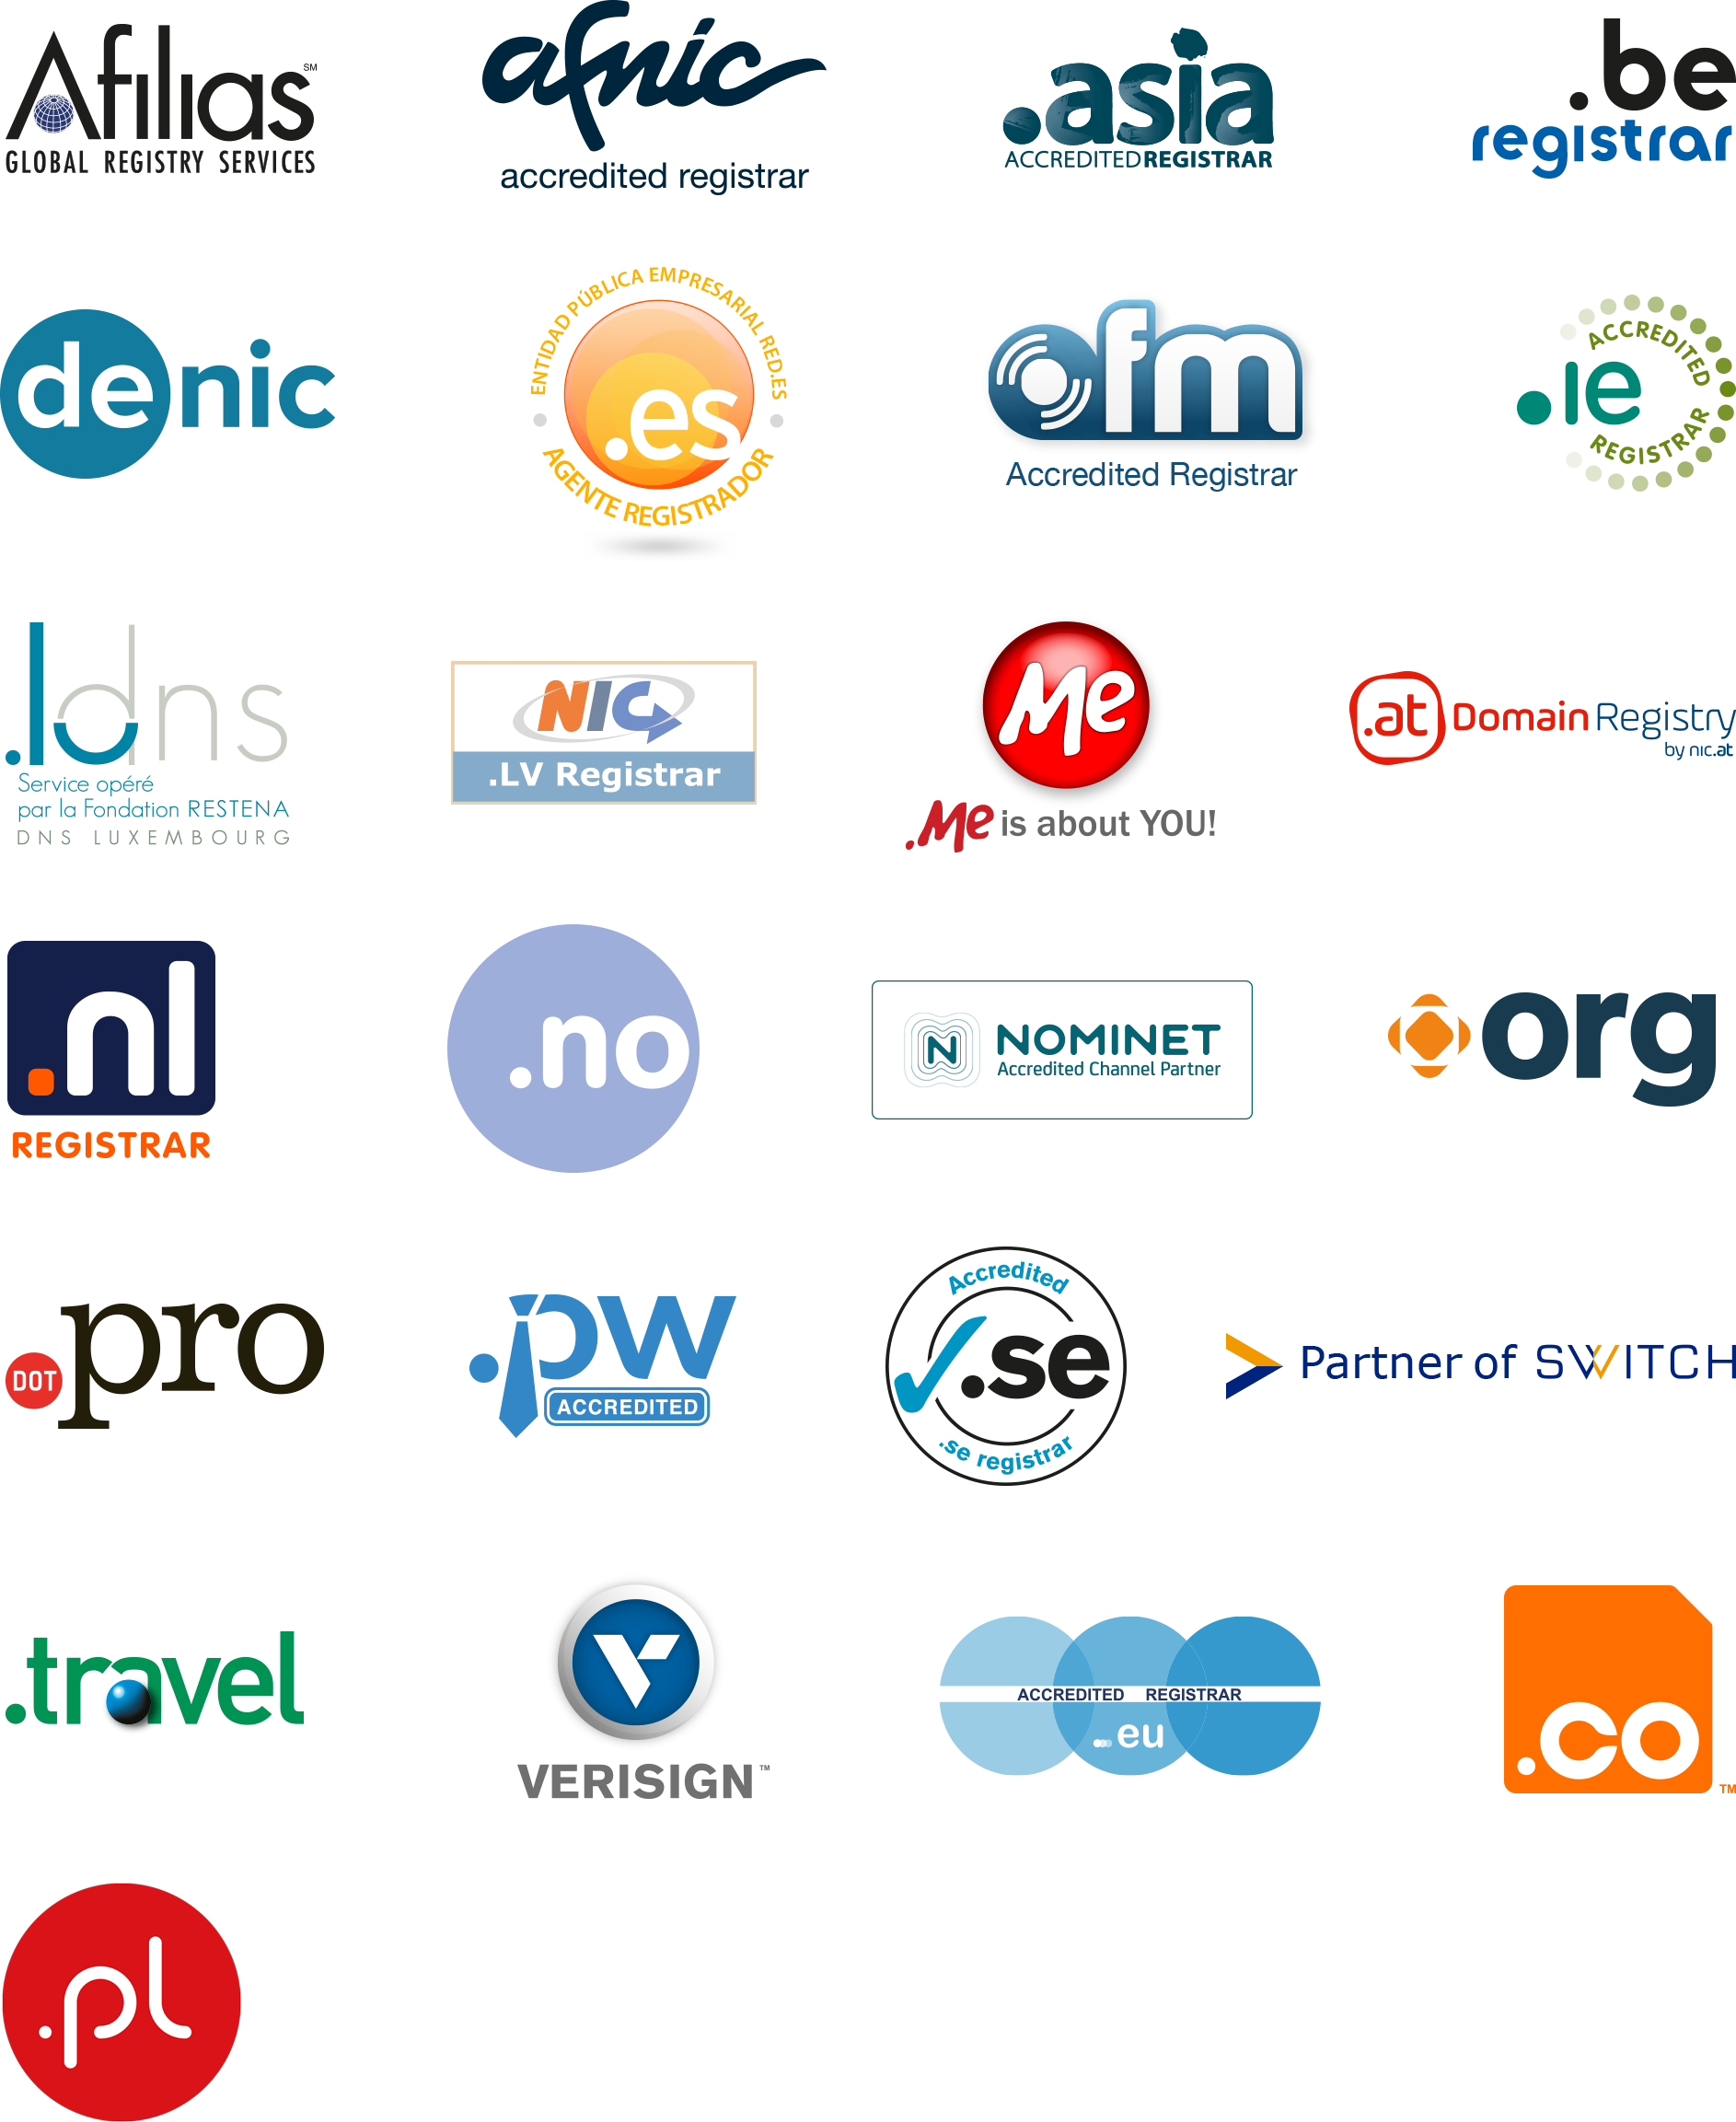 Our partners - EuroDNS partners